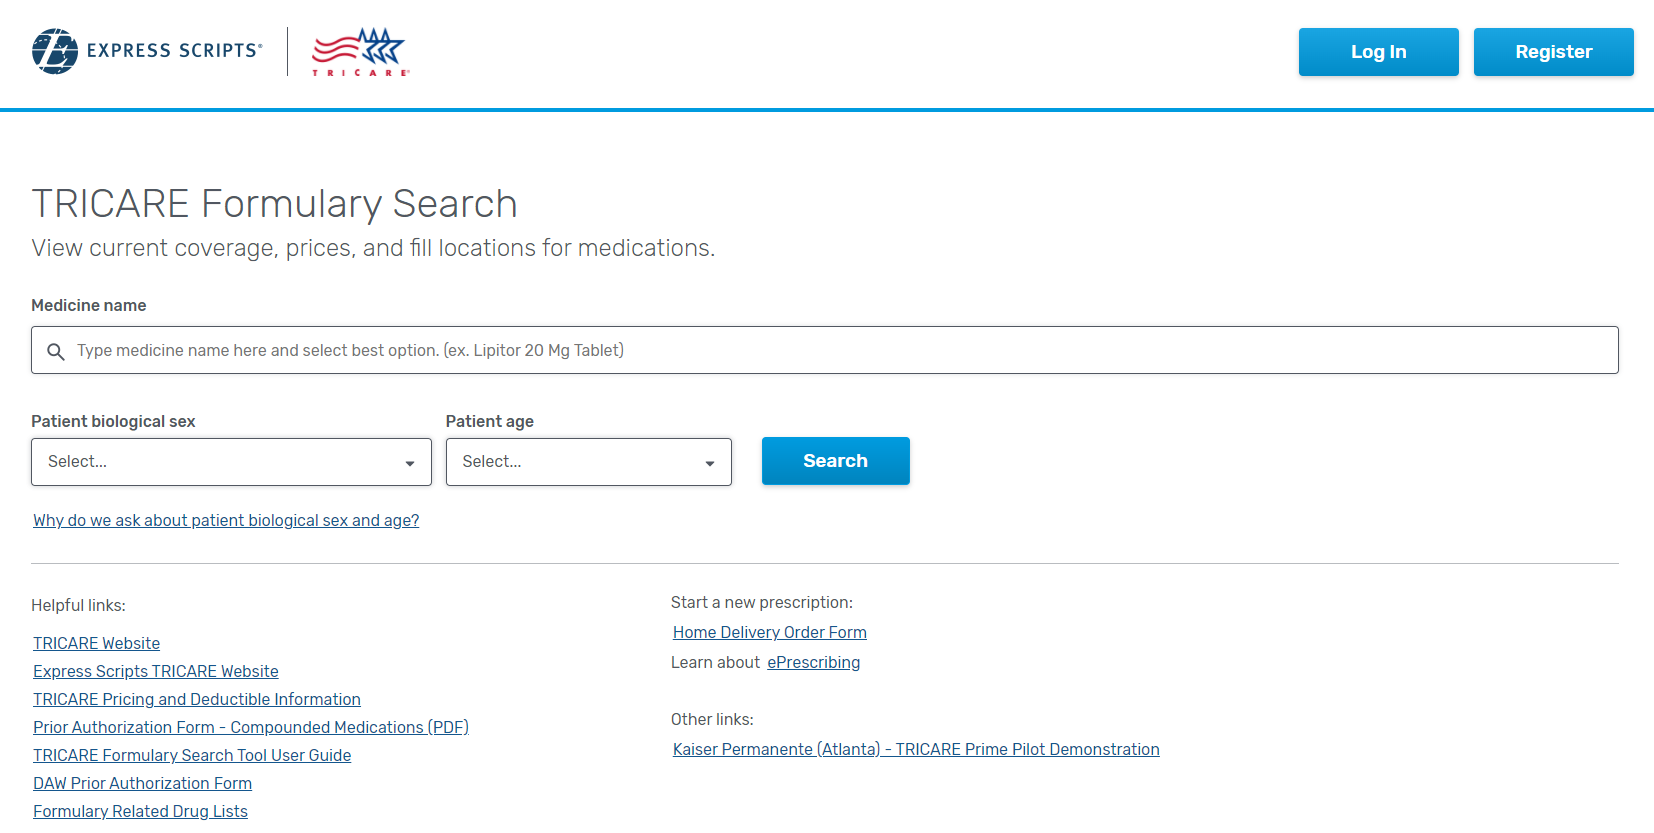 TRICARE Formulary Search Tool Image